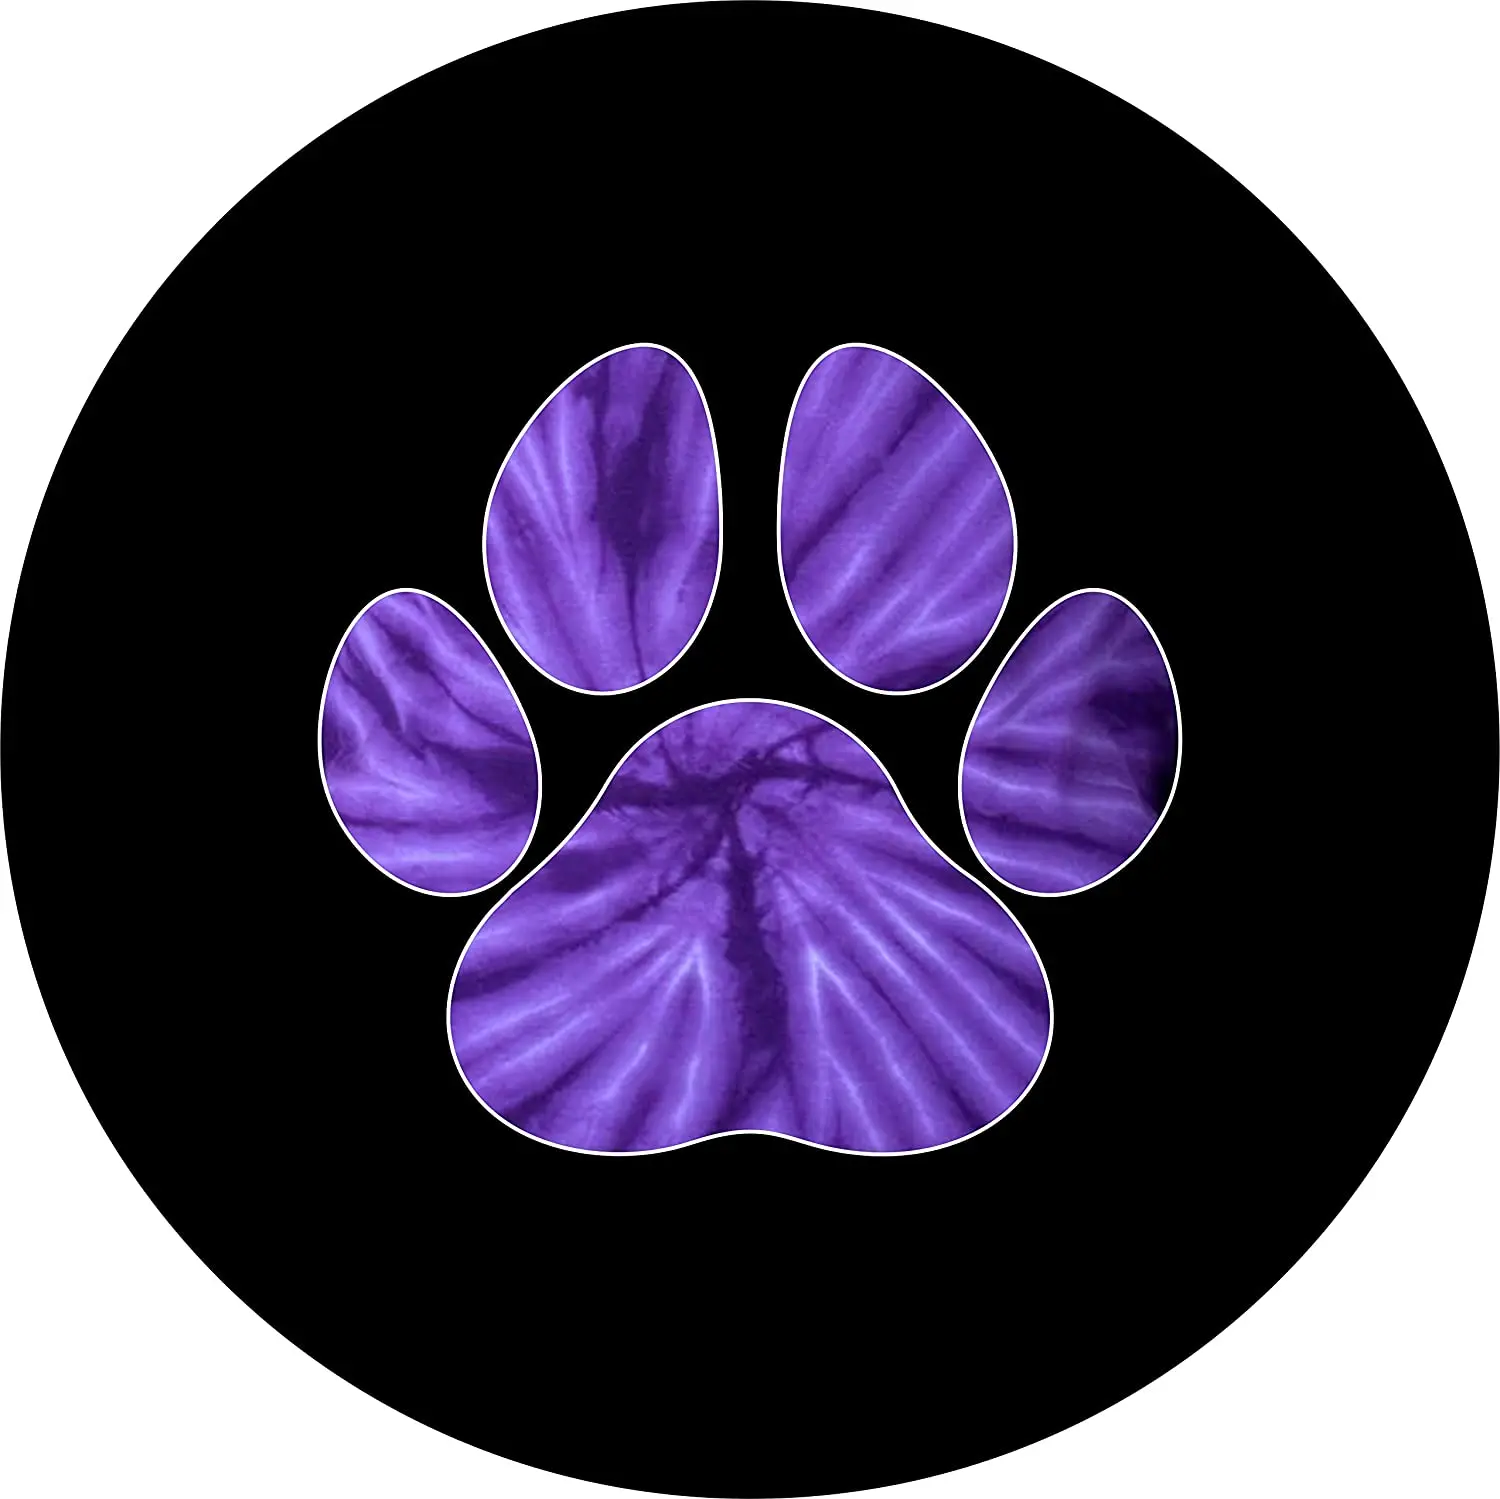 

TIRE COVER CENTRAL Pet or Dog Paws Purple tie dye Spare Tire Cover ( Custom Sized to Any Make/Model 255/75R17